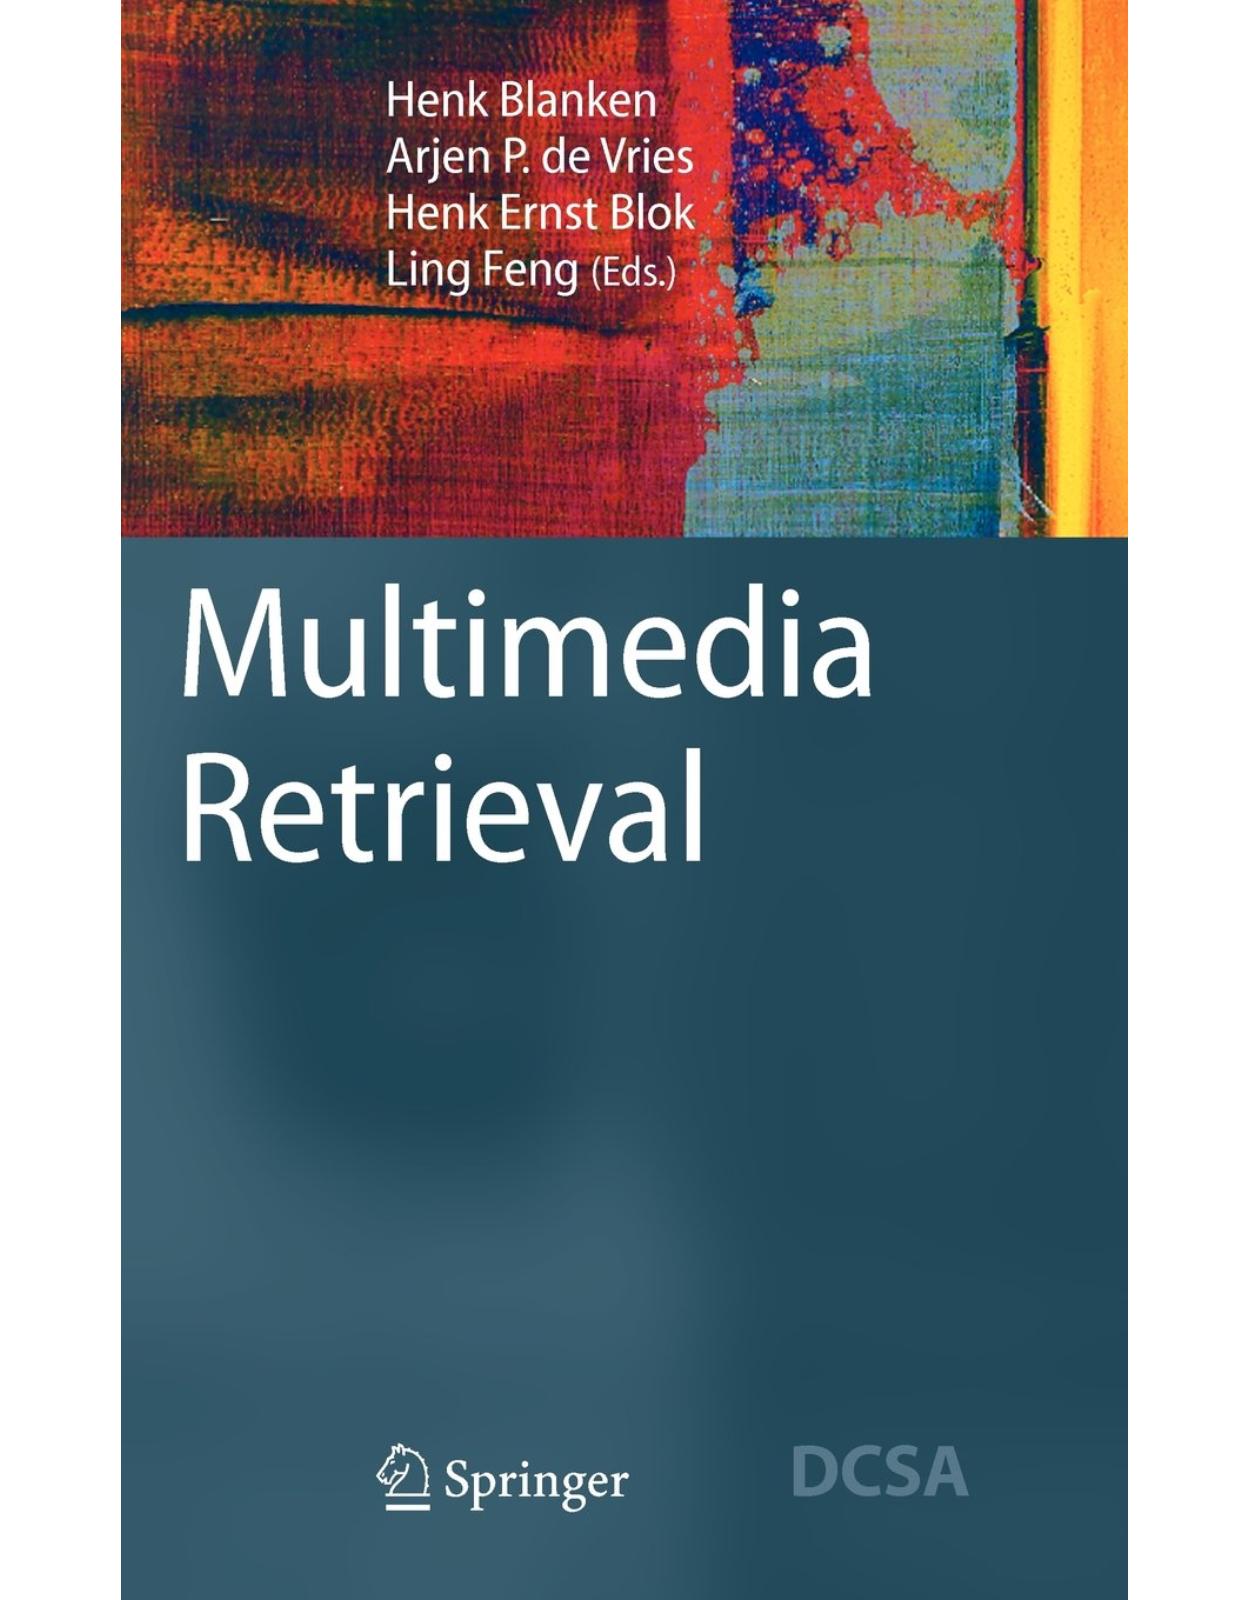 Multimedia Retrieval (Data-Centric Systems and Applications)